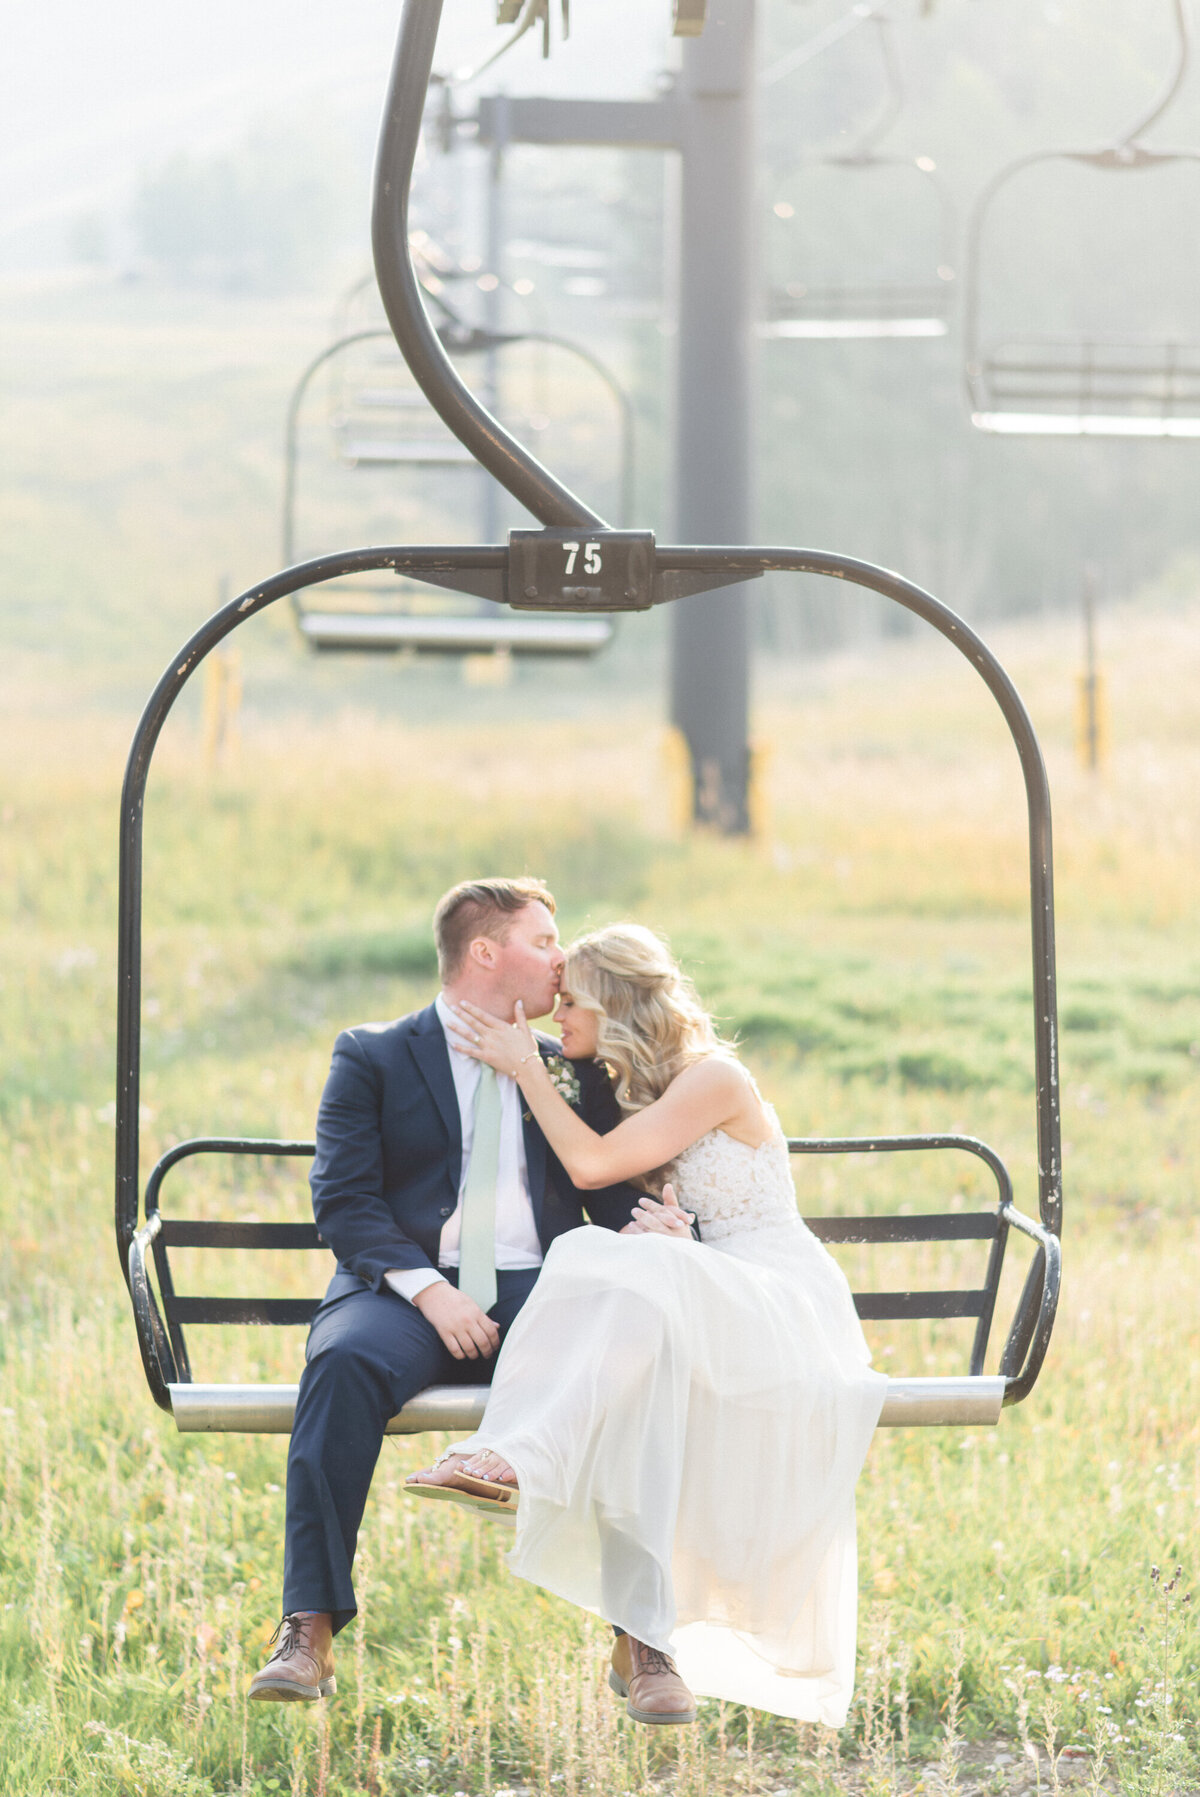 Summer Granby Wedding, bride & groom portraits on chairlift